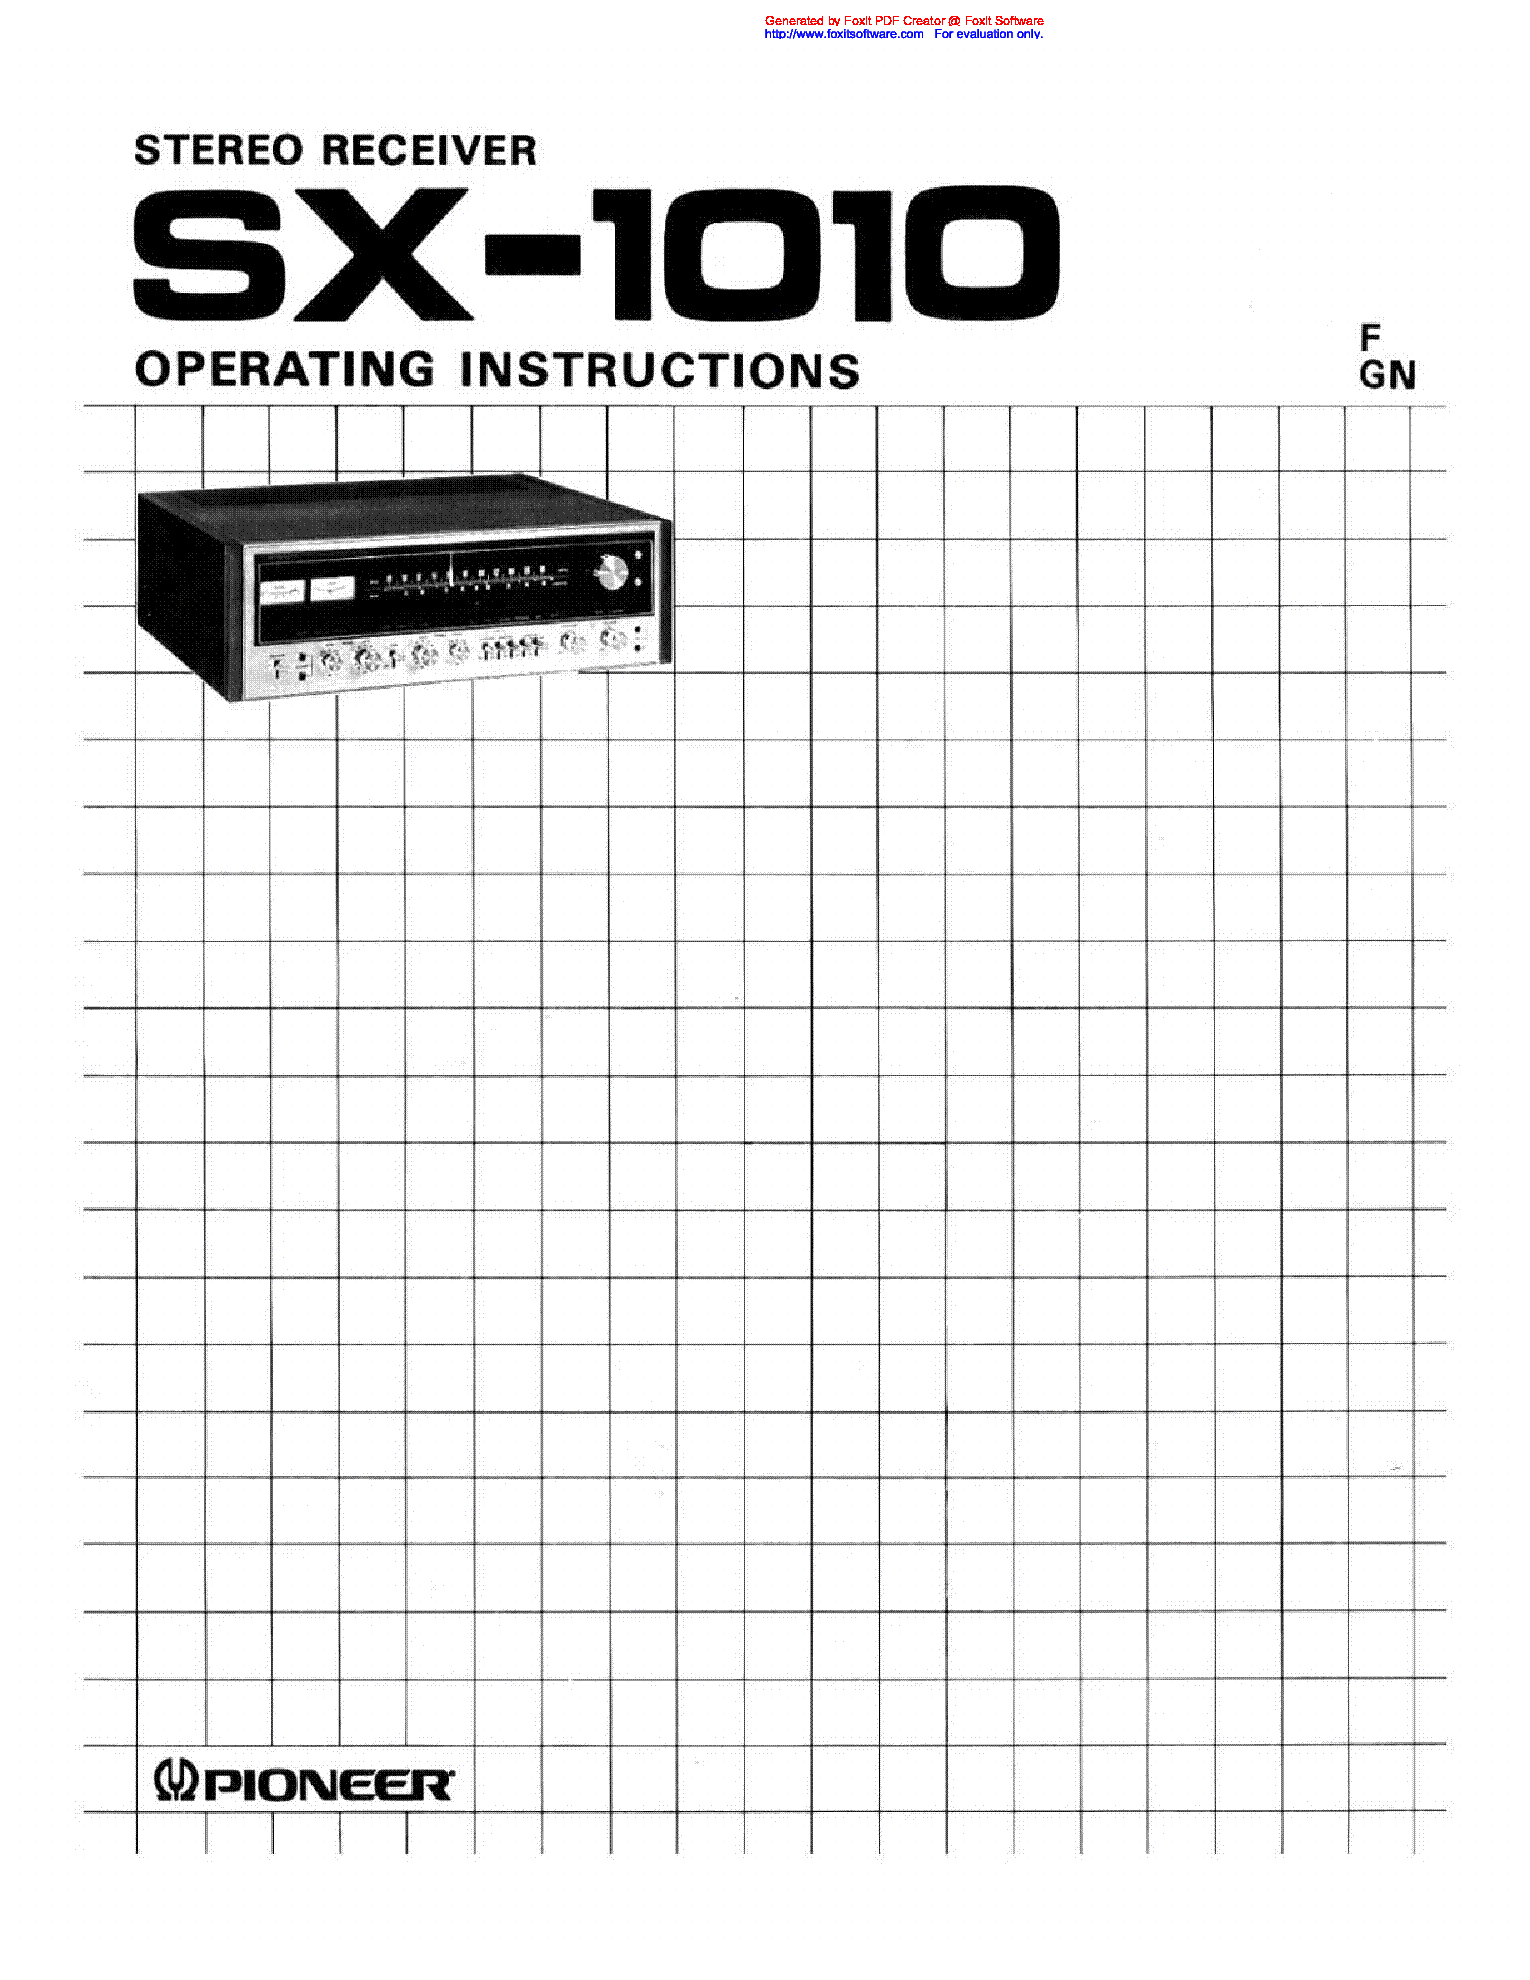 PIONEER SX-1010 OPERATING INSTRUCTIONS service manual (1st page)